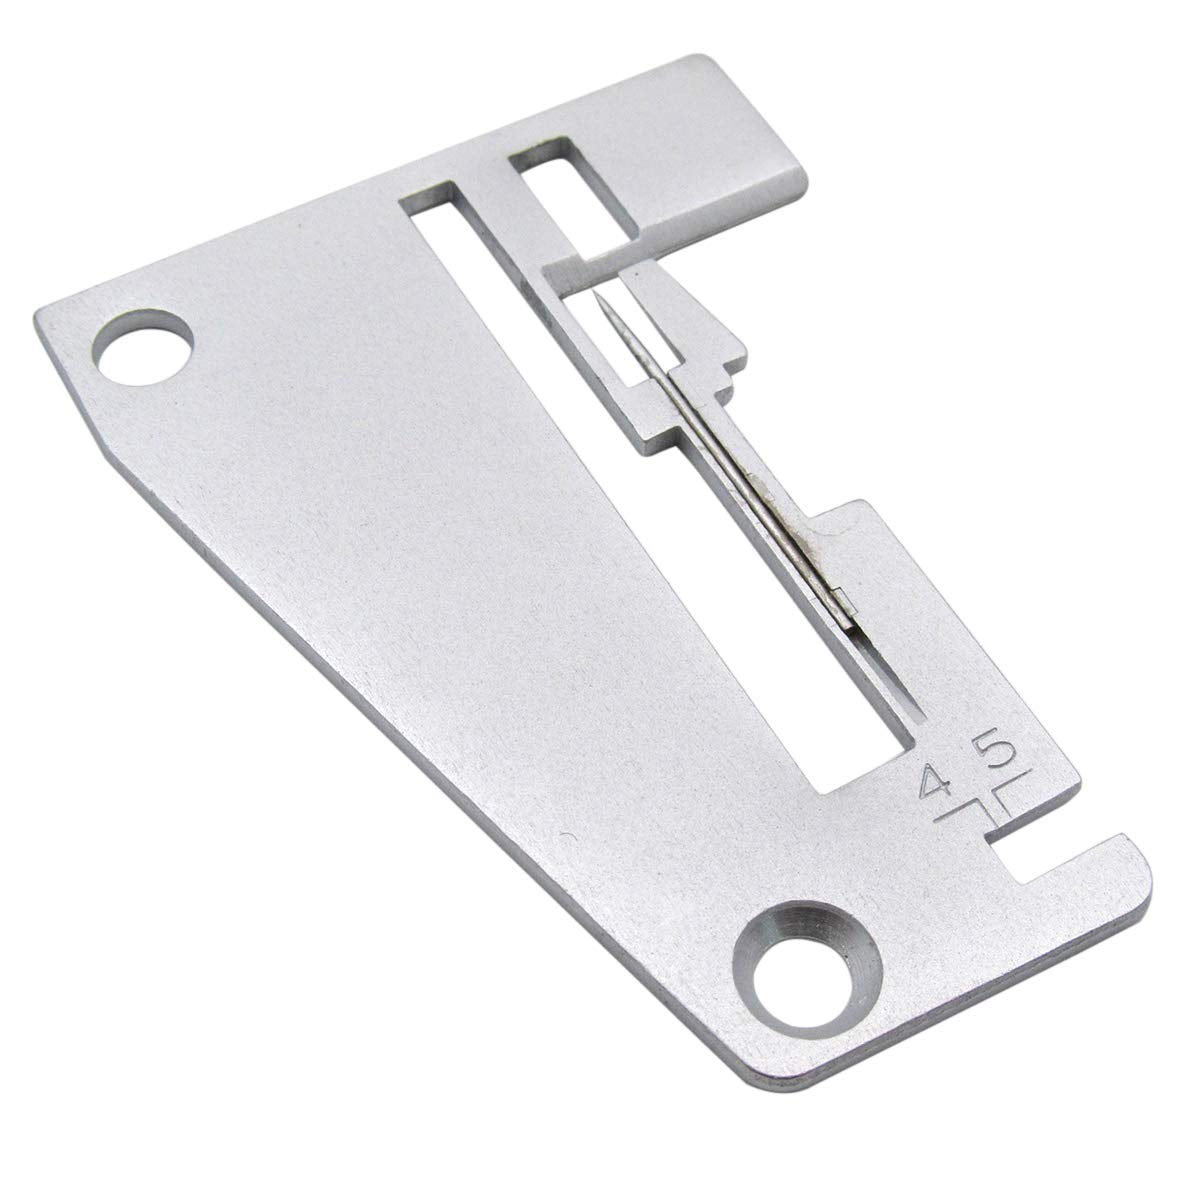 60993-1 Needle Plate for Omega, Elna, Babylock, Simplicity, more